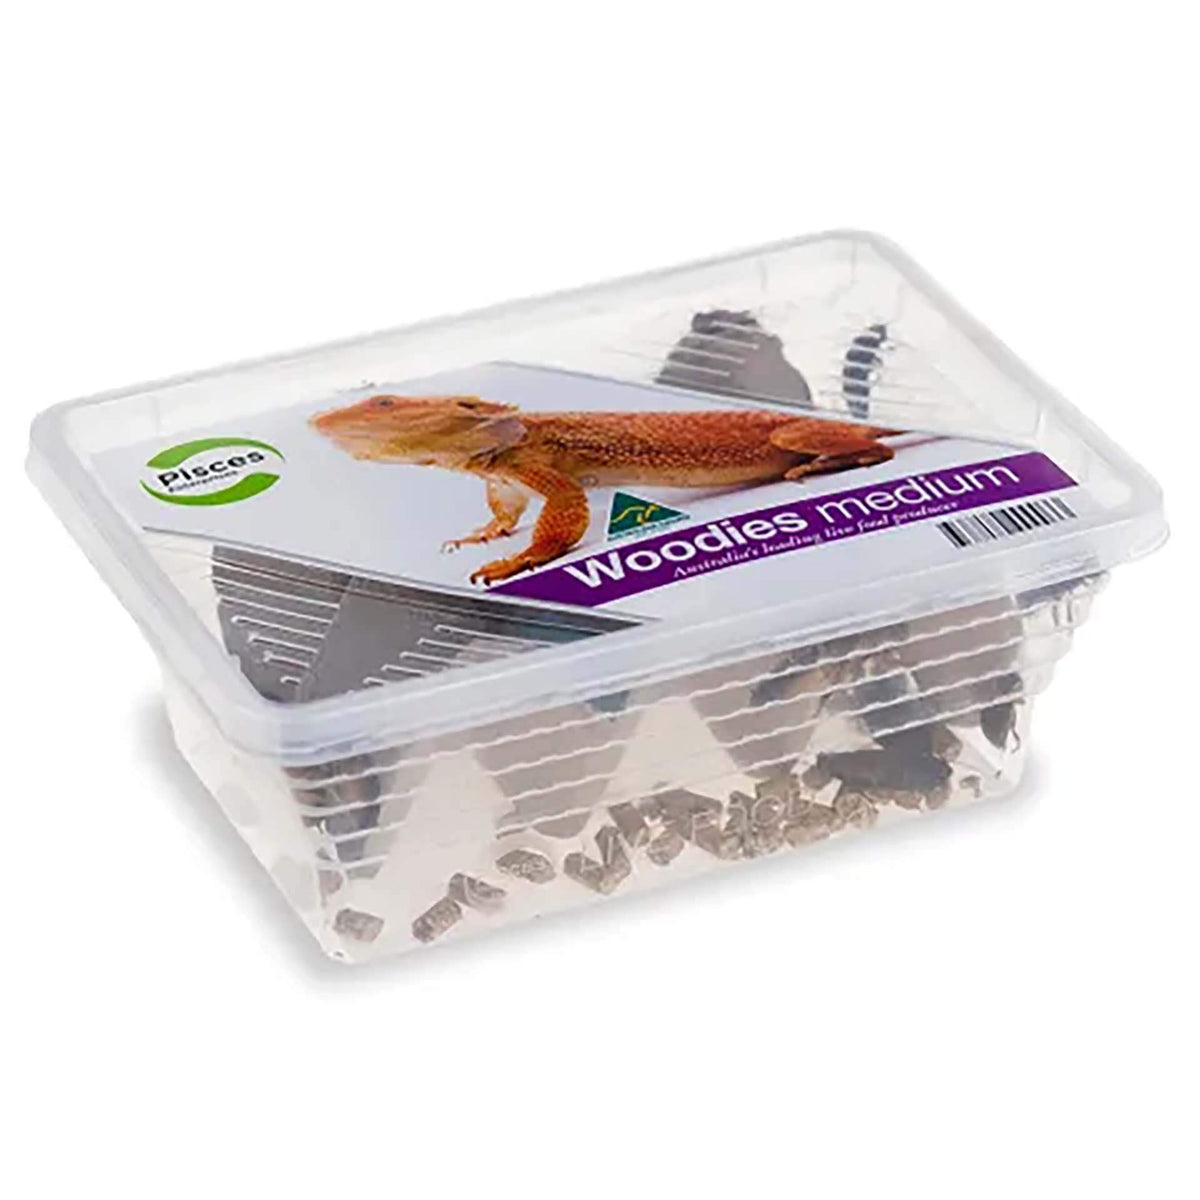 Pisces Woodies Medium - 50g Tub Live Food - Instore Pick Up Only